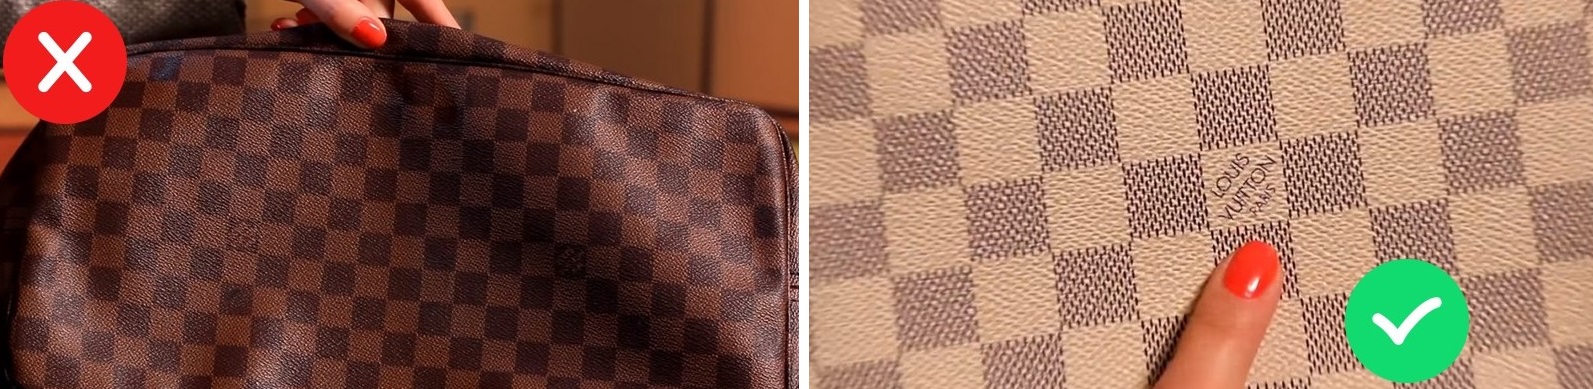 Logo on the original Louis Vuitton bag and on the fake